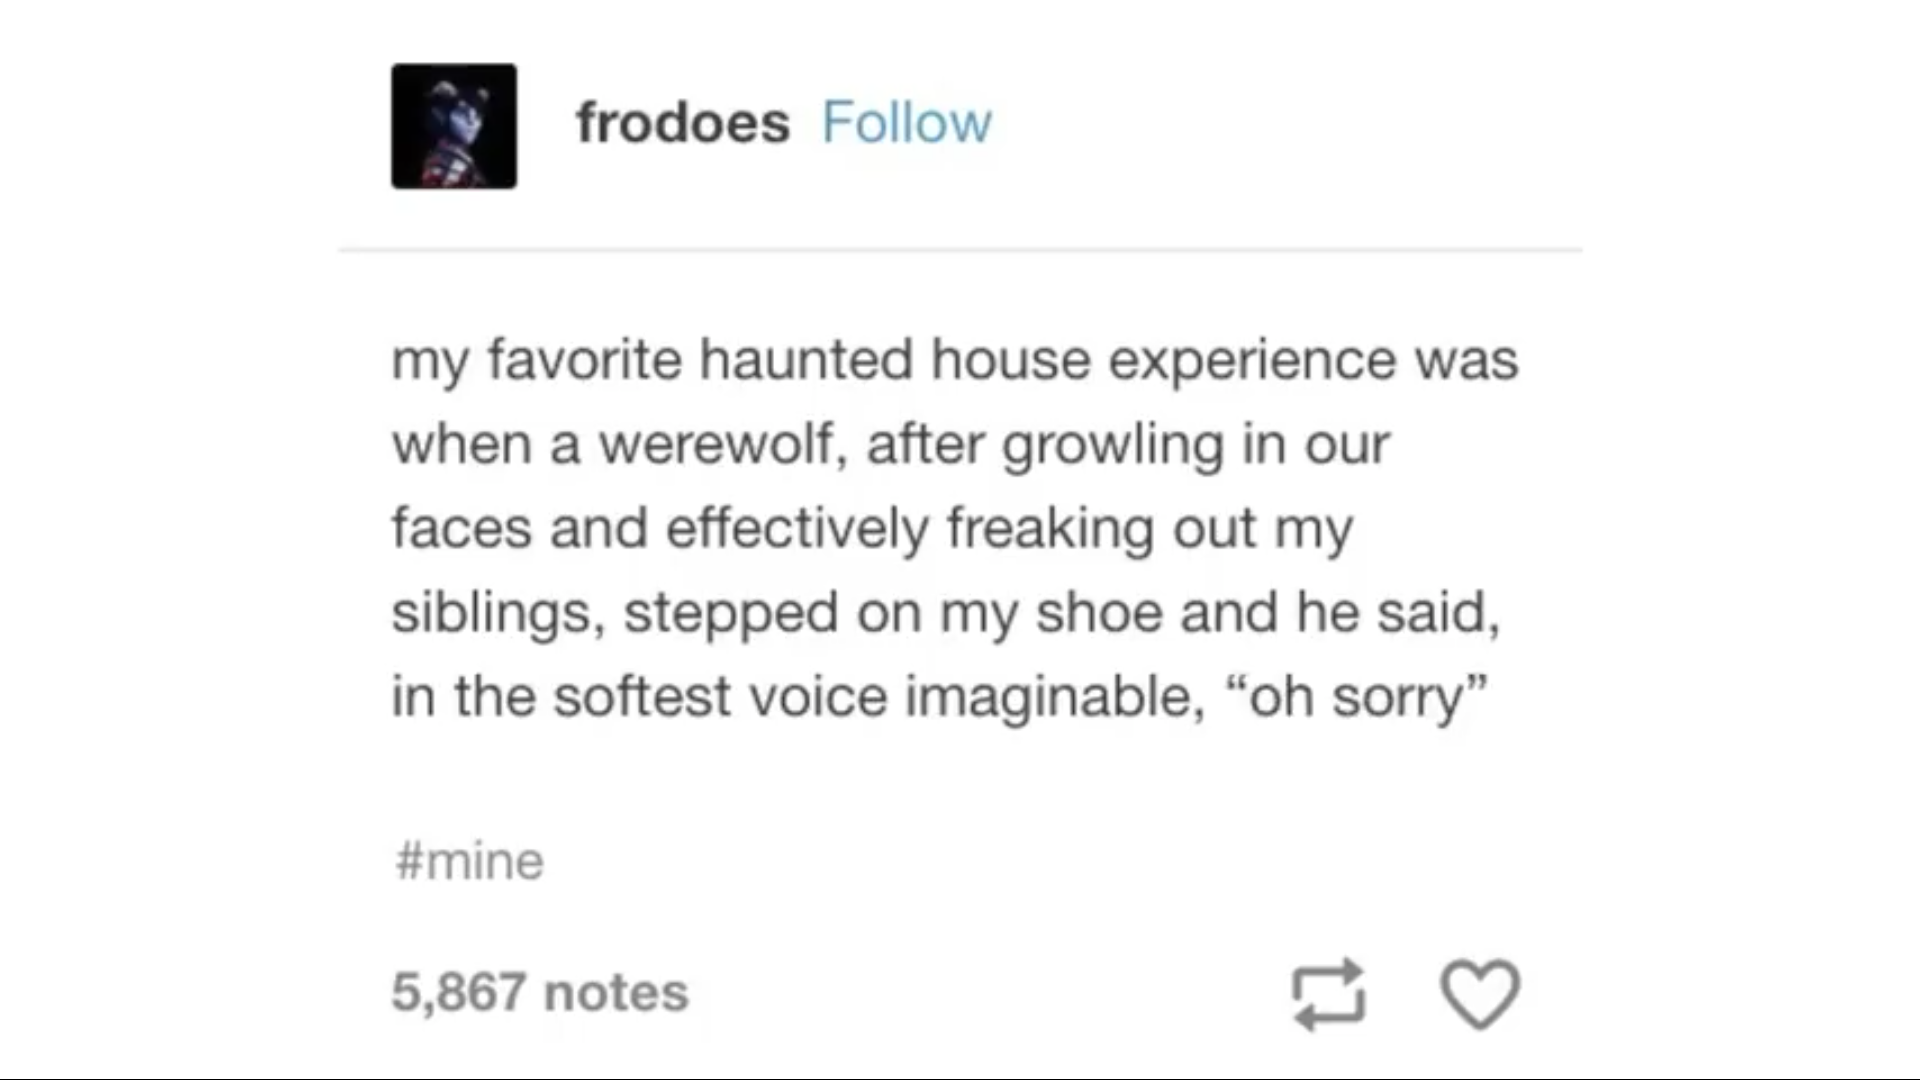 memes - document - frodoes my favorite haunted house experience was when a werewolf, after growling in our faces and effectively freaking out my siblings, stepped on my shoe and he said, in the softest voice imaginable, "oh sorry" 5,867 notes